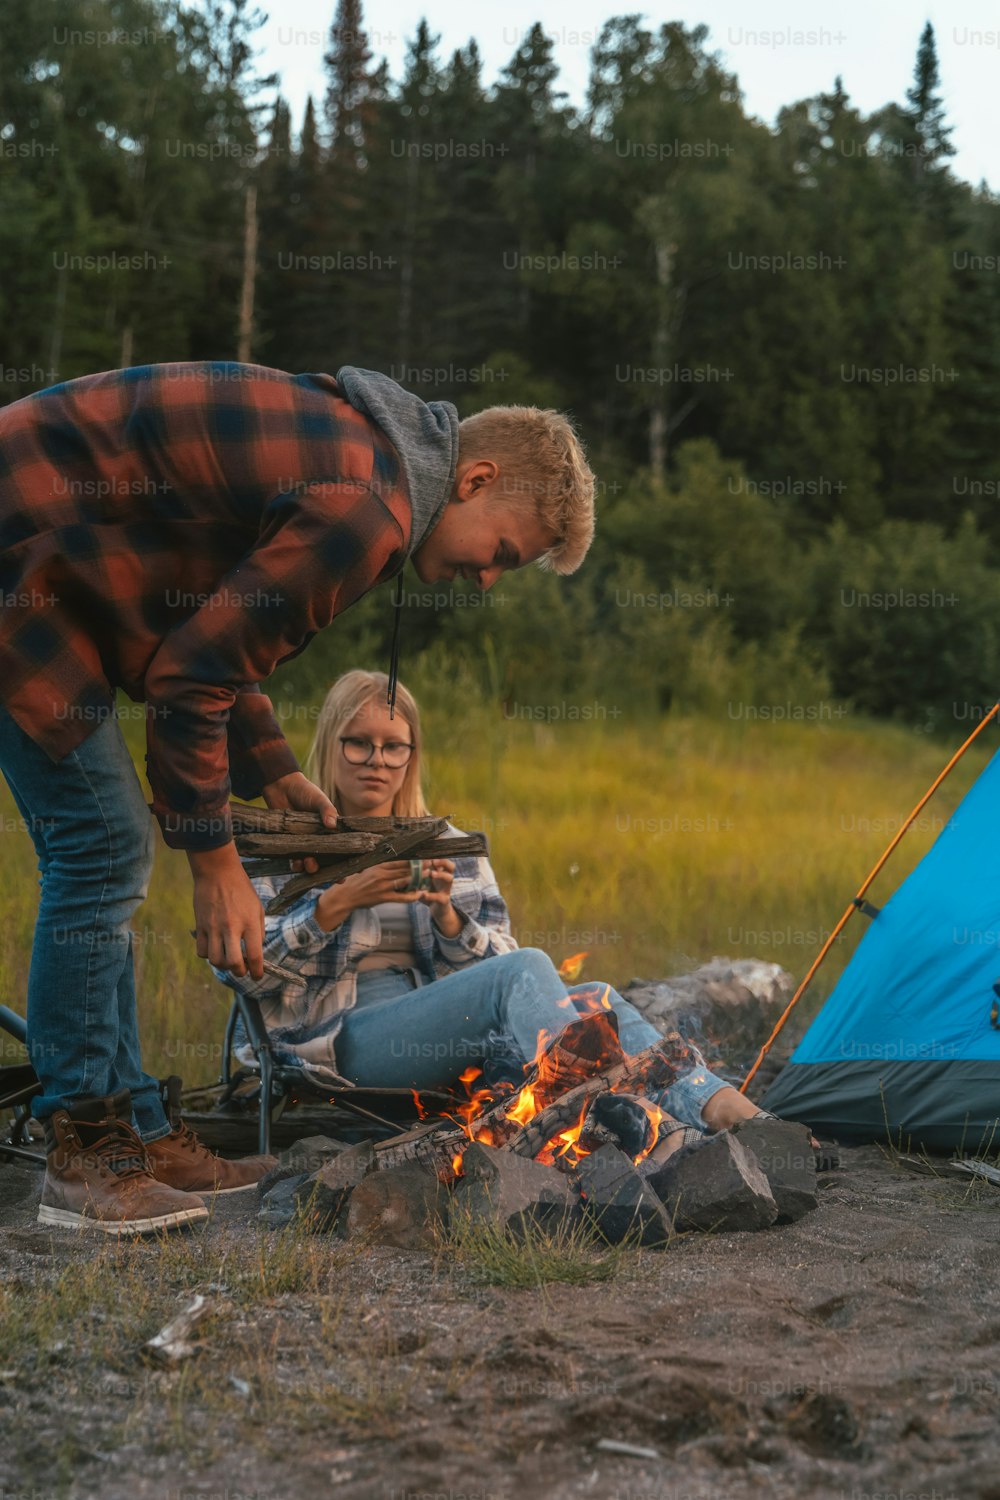 a man and a woman setting up a campfire